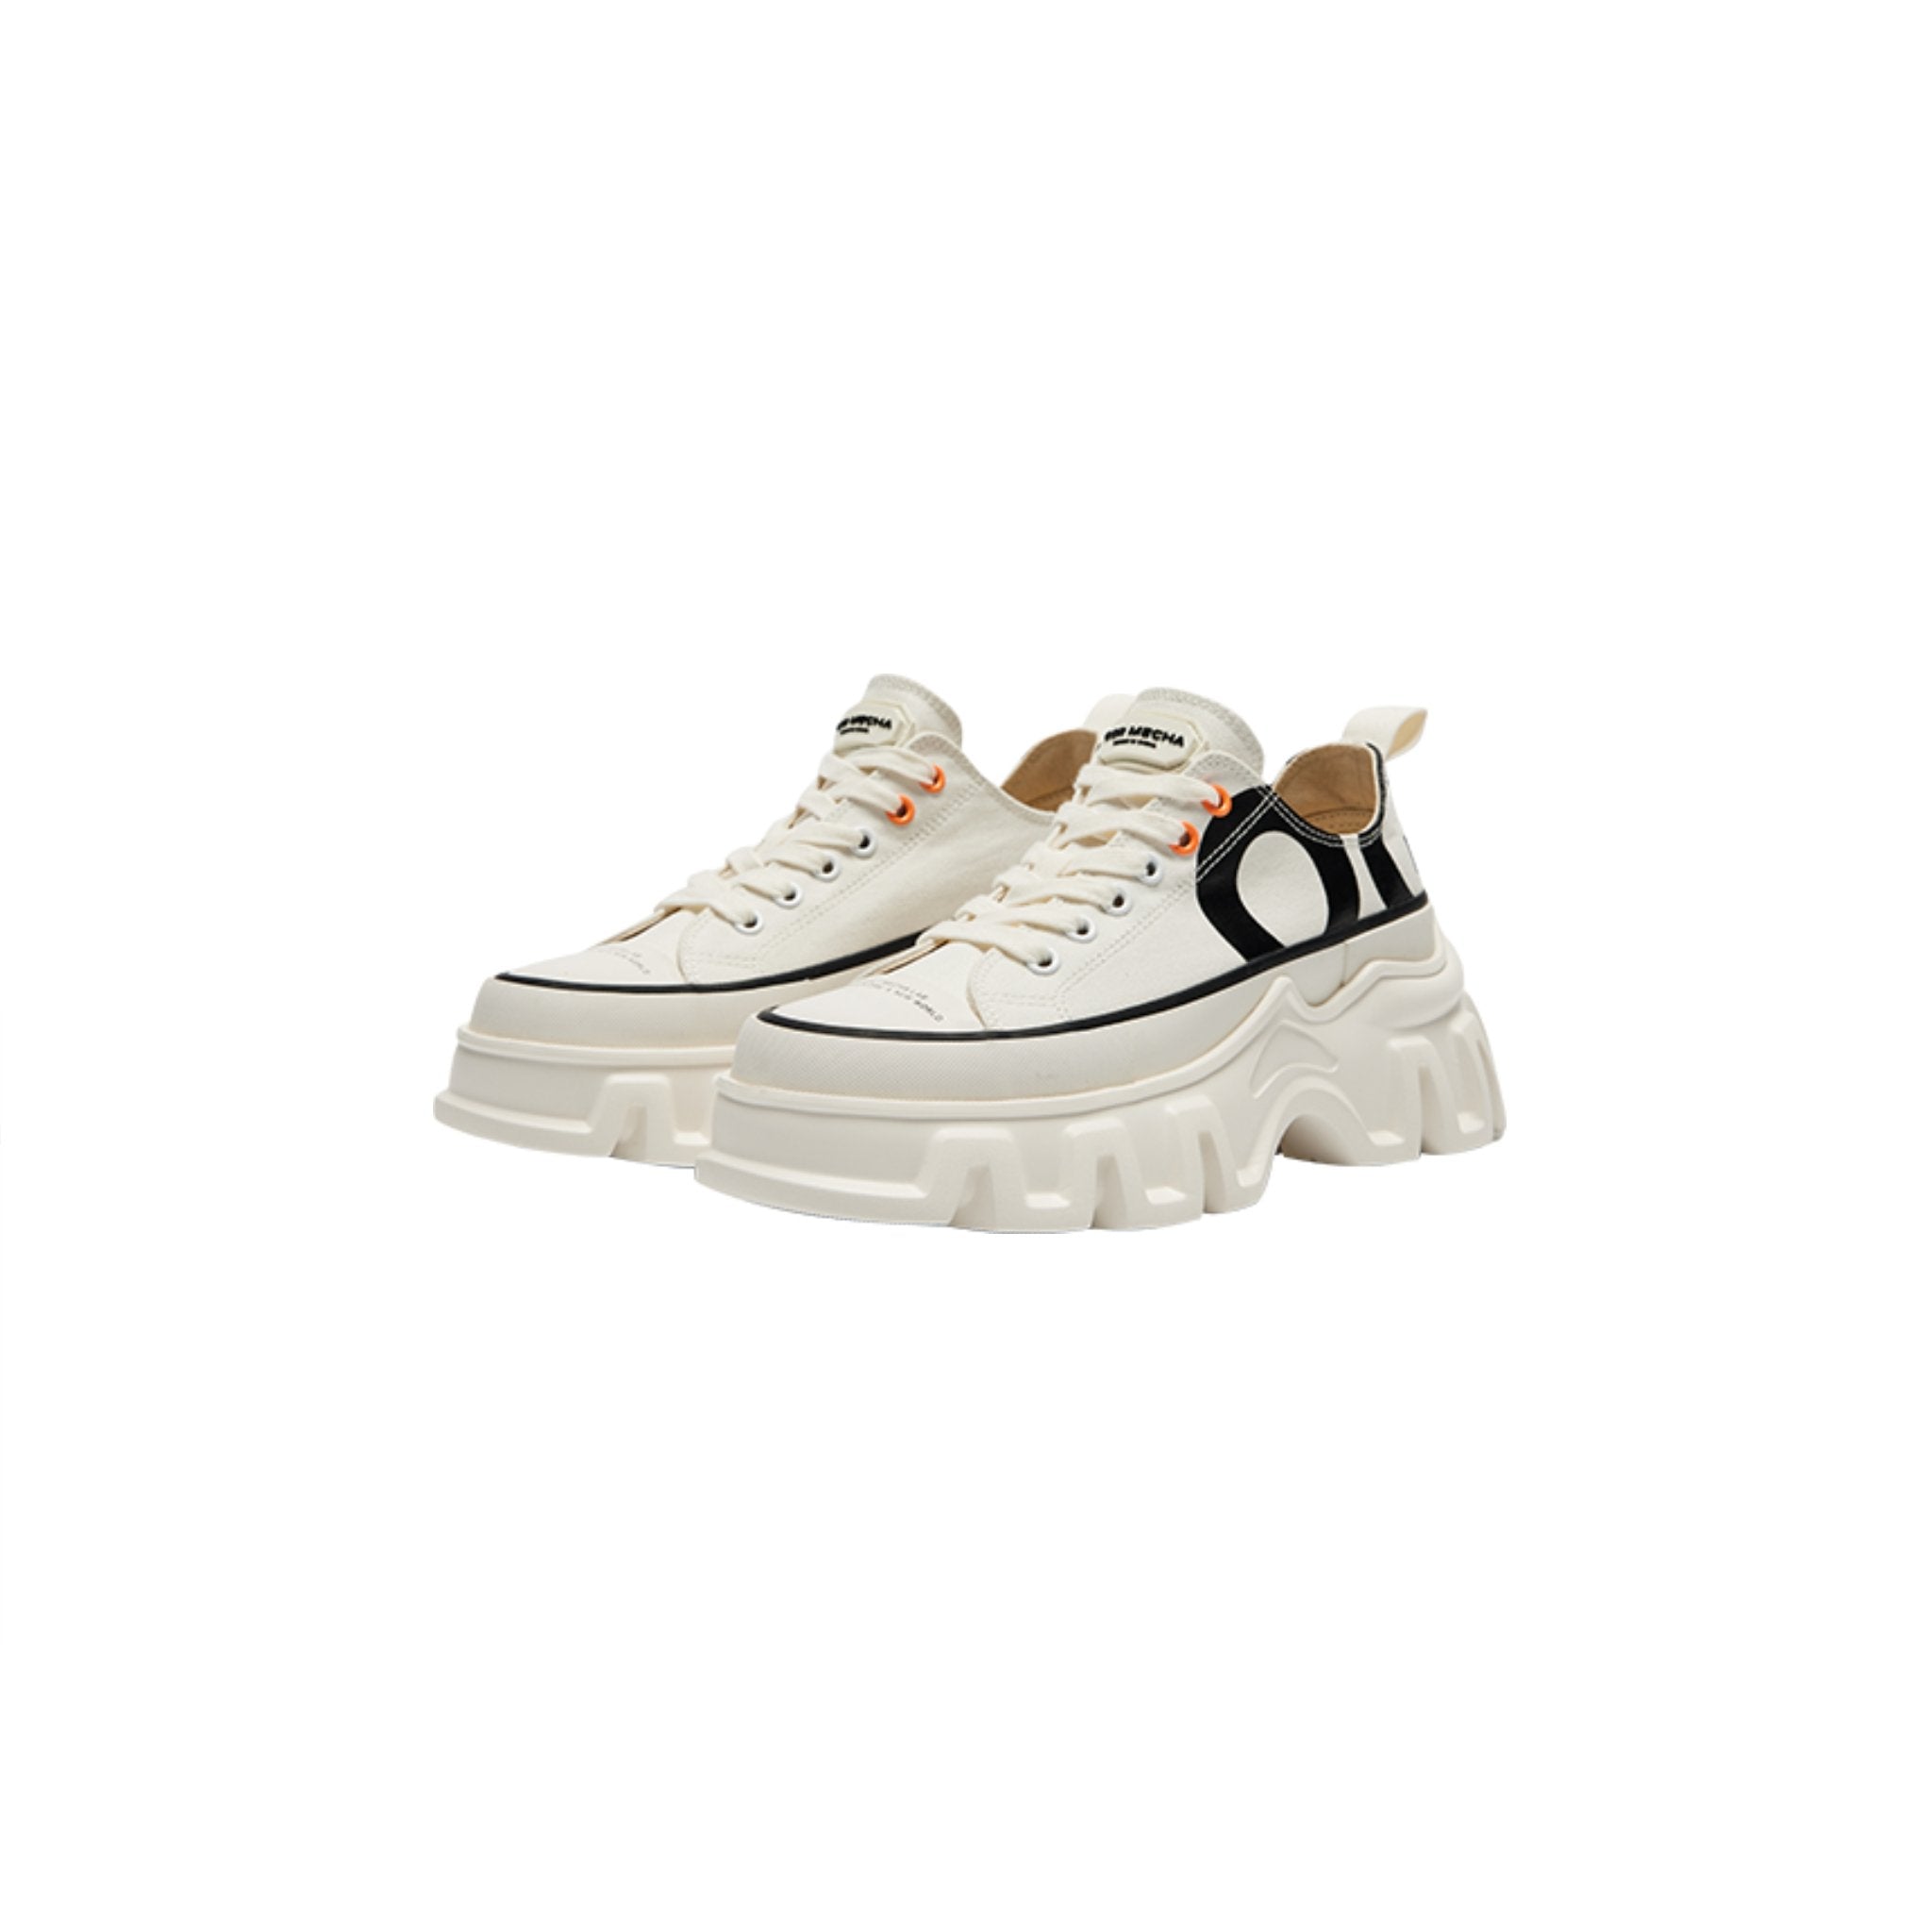 OGR SHEN FL Lows Prints Canvas Shoes White | MADA IN CHINA